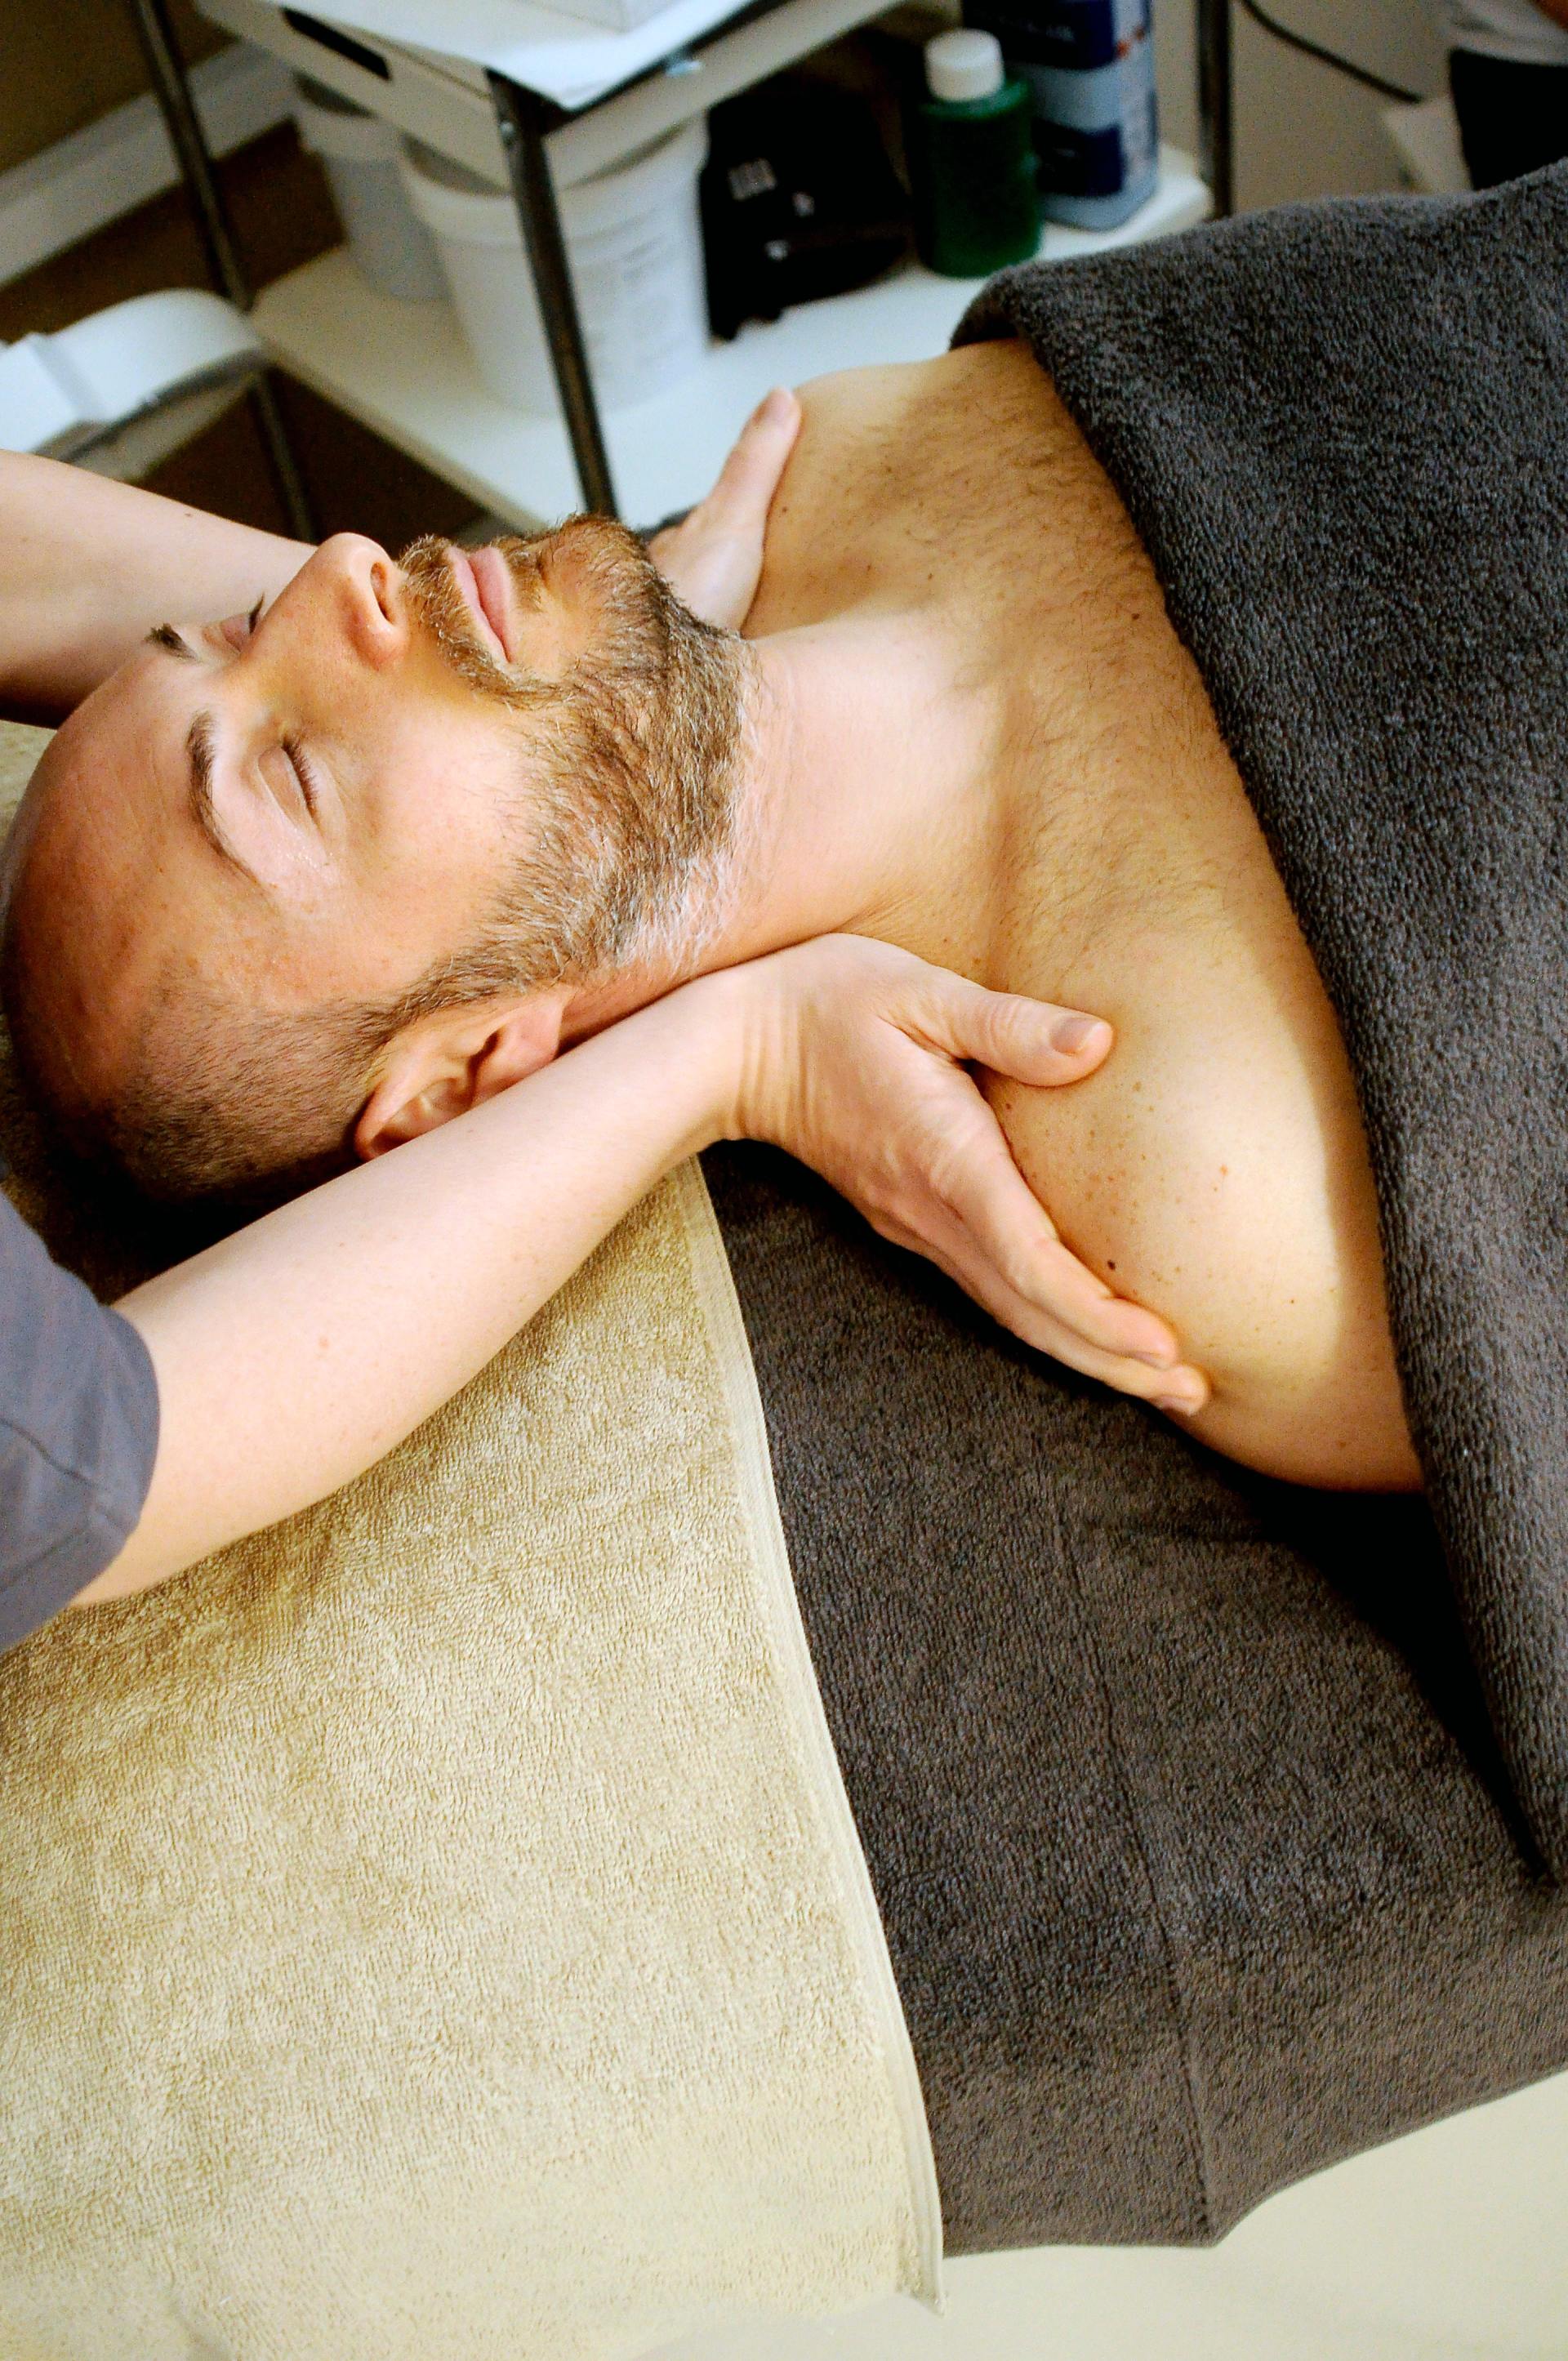 Is deep tissue massage painful?